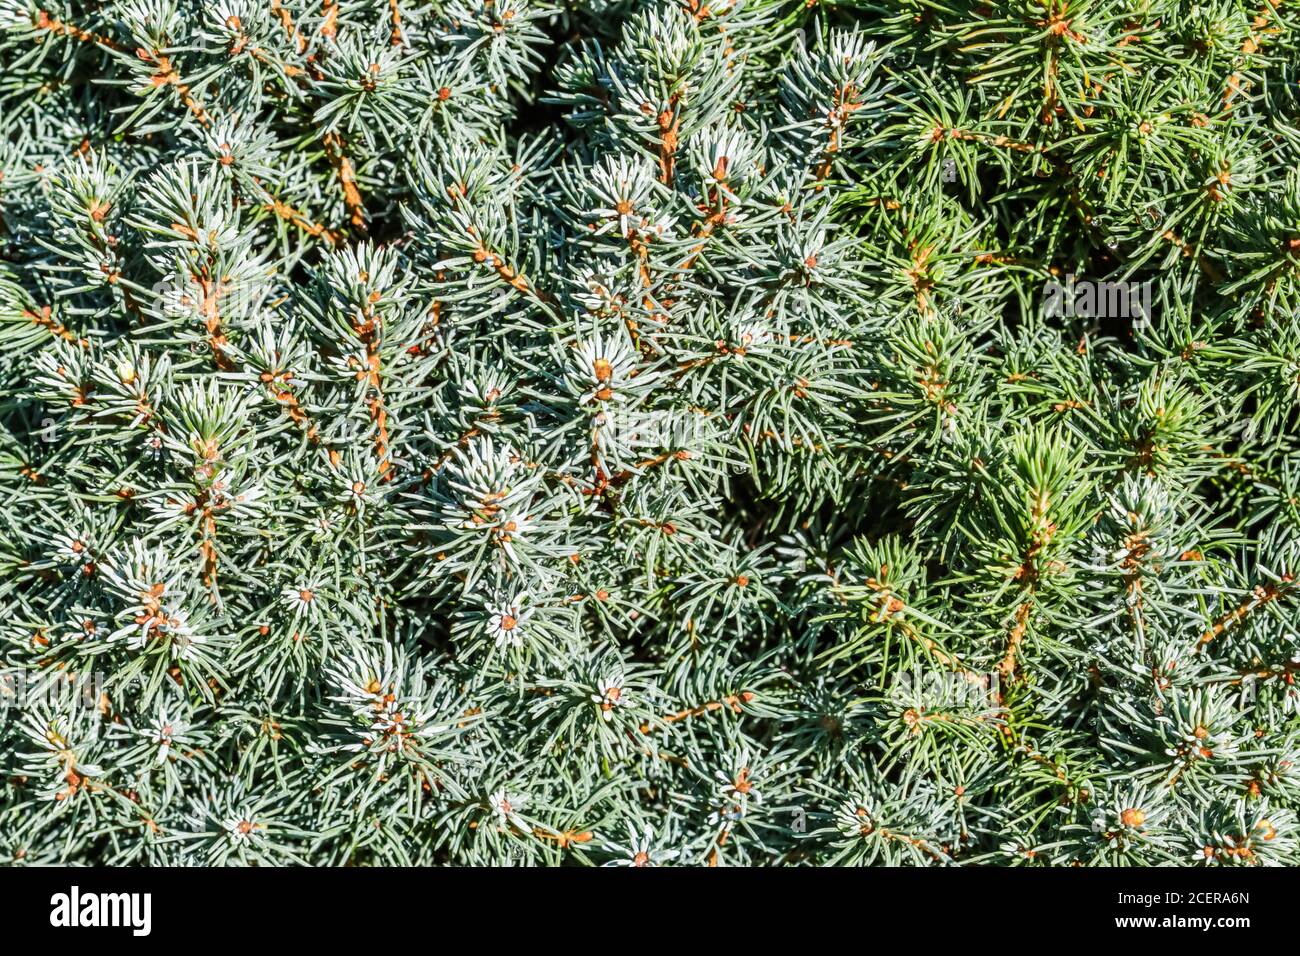 Closeup green leaves of decorative evergreen coniferous tree Canadian spruce Picea glauca with drops of water after the rain. Natural background Stock Photo